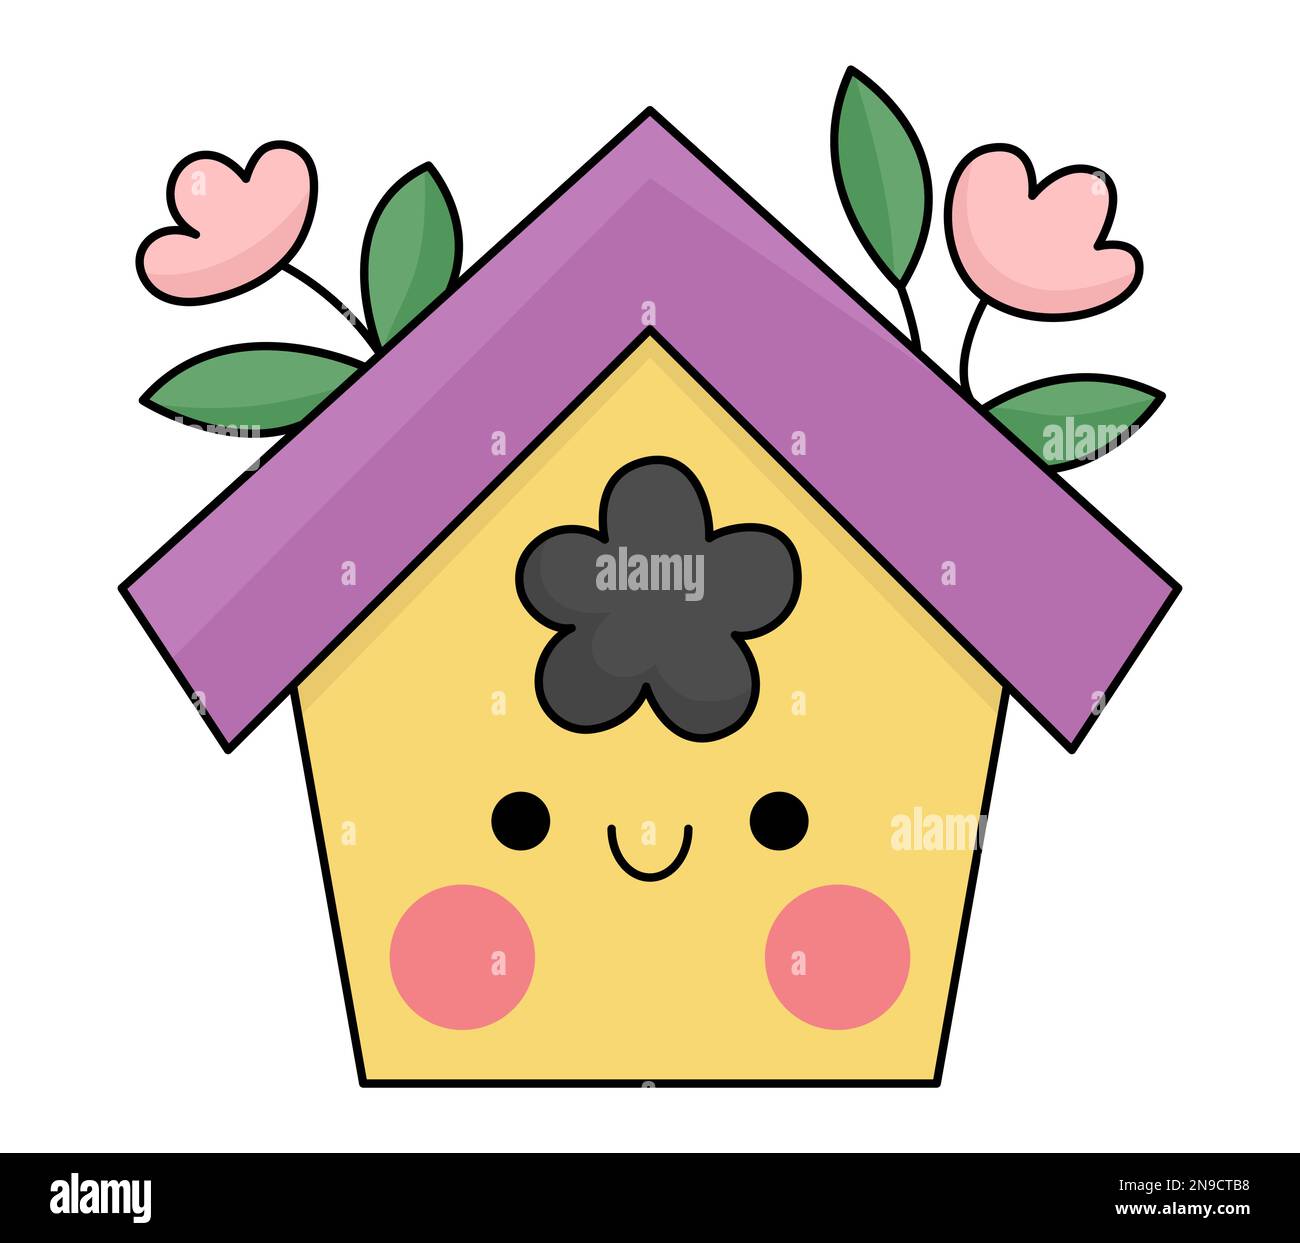 Vector kawaii birdhouse icon for kids. Cute Easter symbol illustration. Funny cartoon character. Adorable spring starling or bird house clipart with p Stock Vector